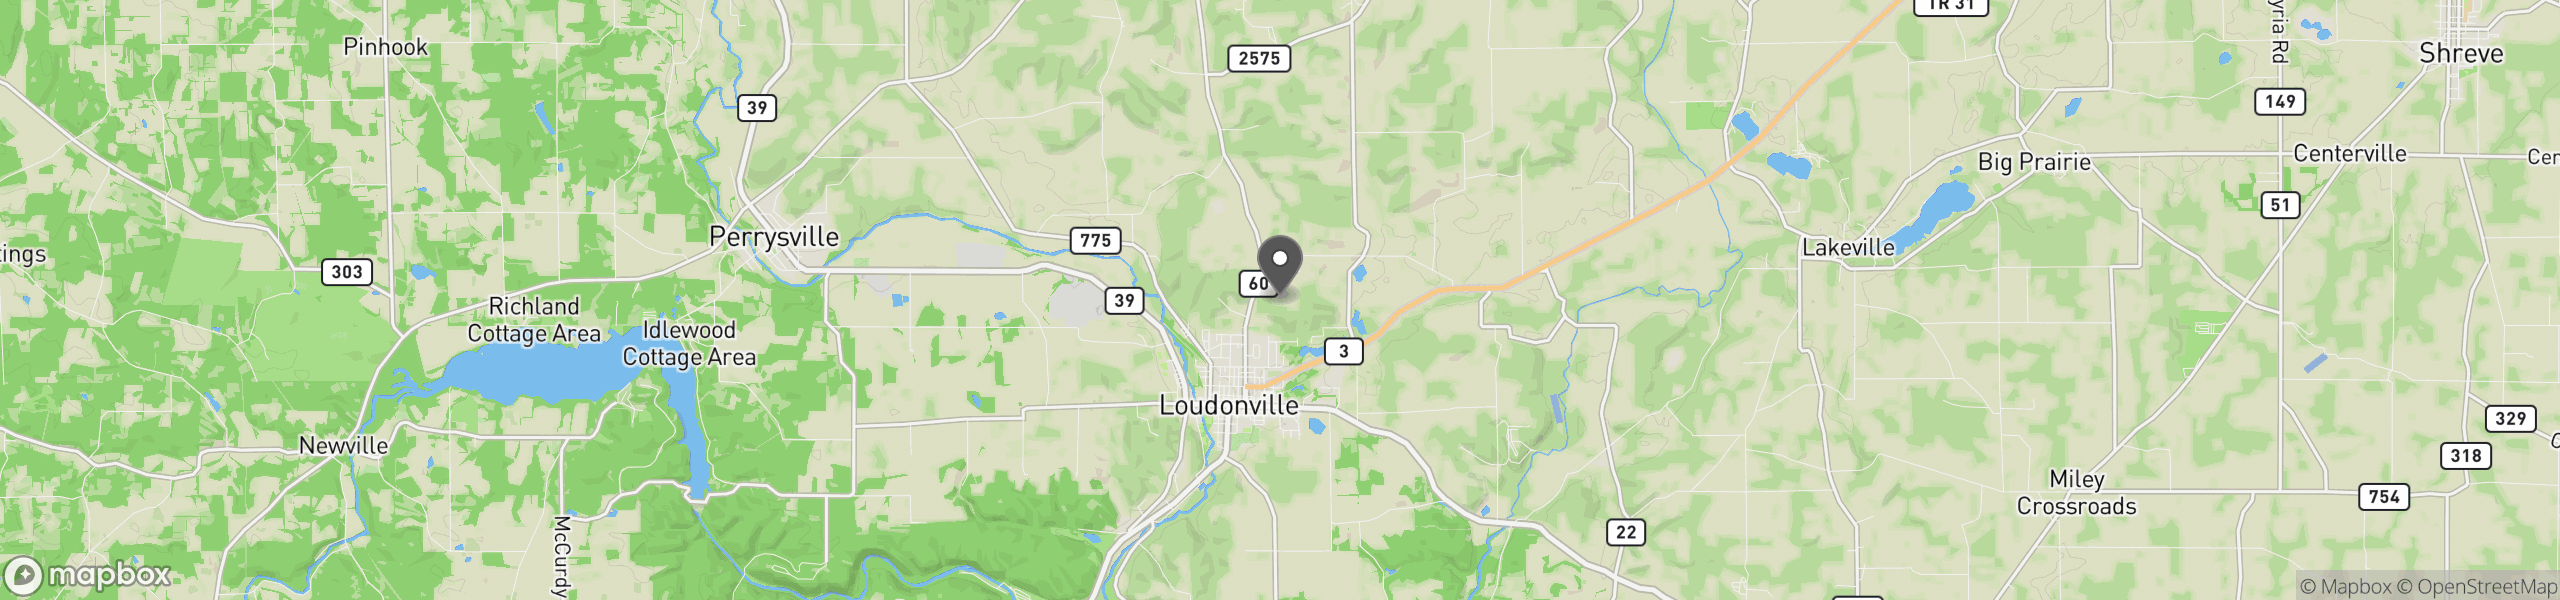 Loudonville, OH